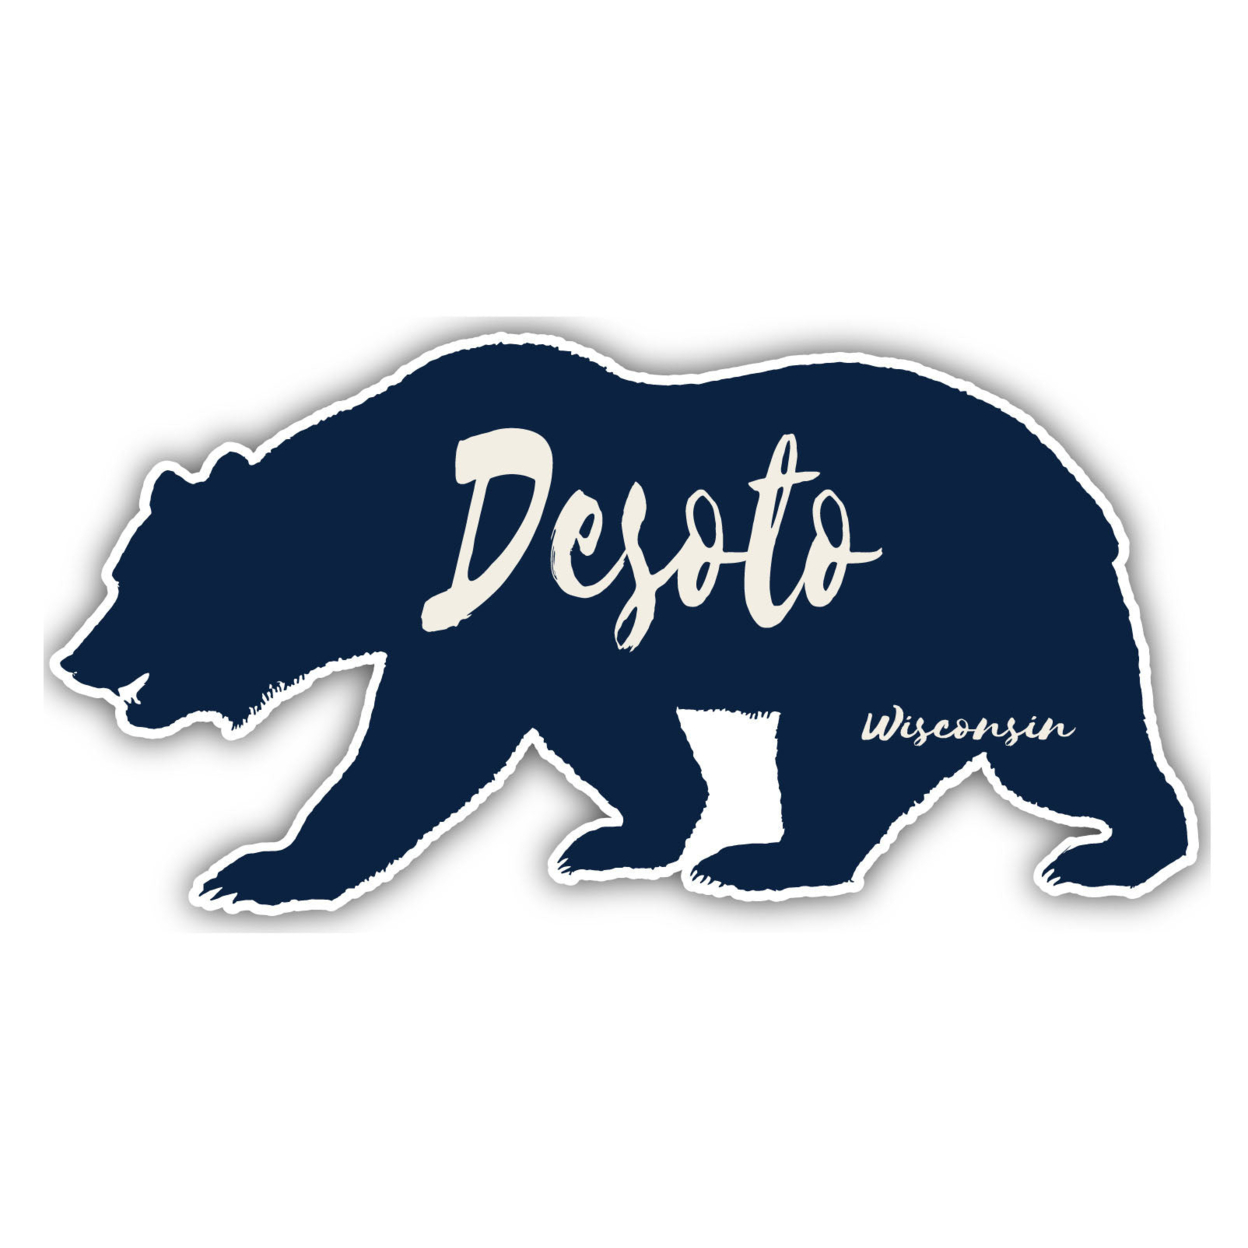 DeSoto Wisconsin Souvenir Decorative Stickers (Choose Theme And Size) - 4-Pack, 4-Inch, Bear